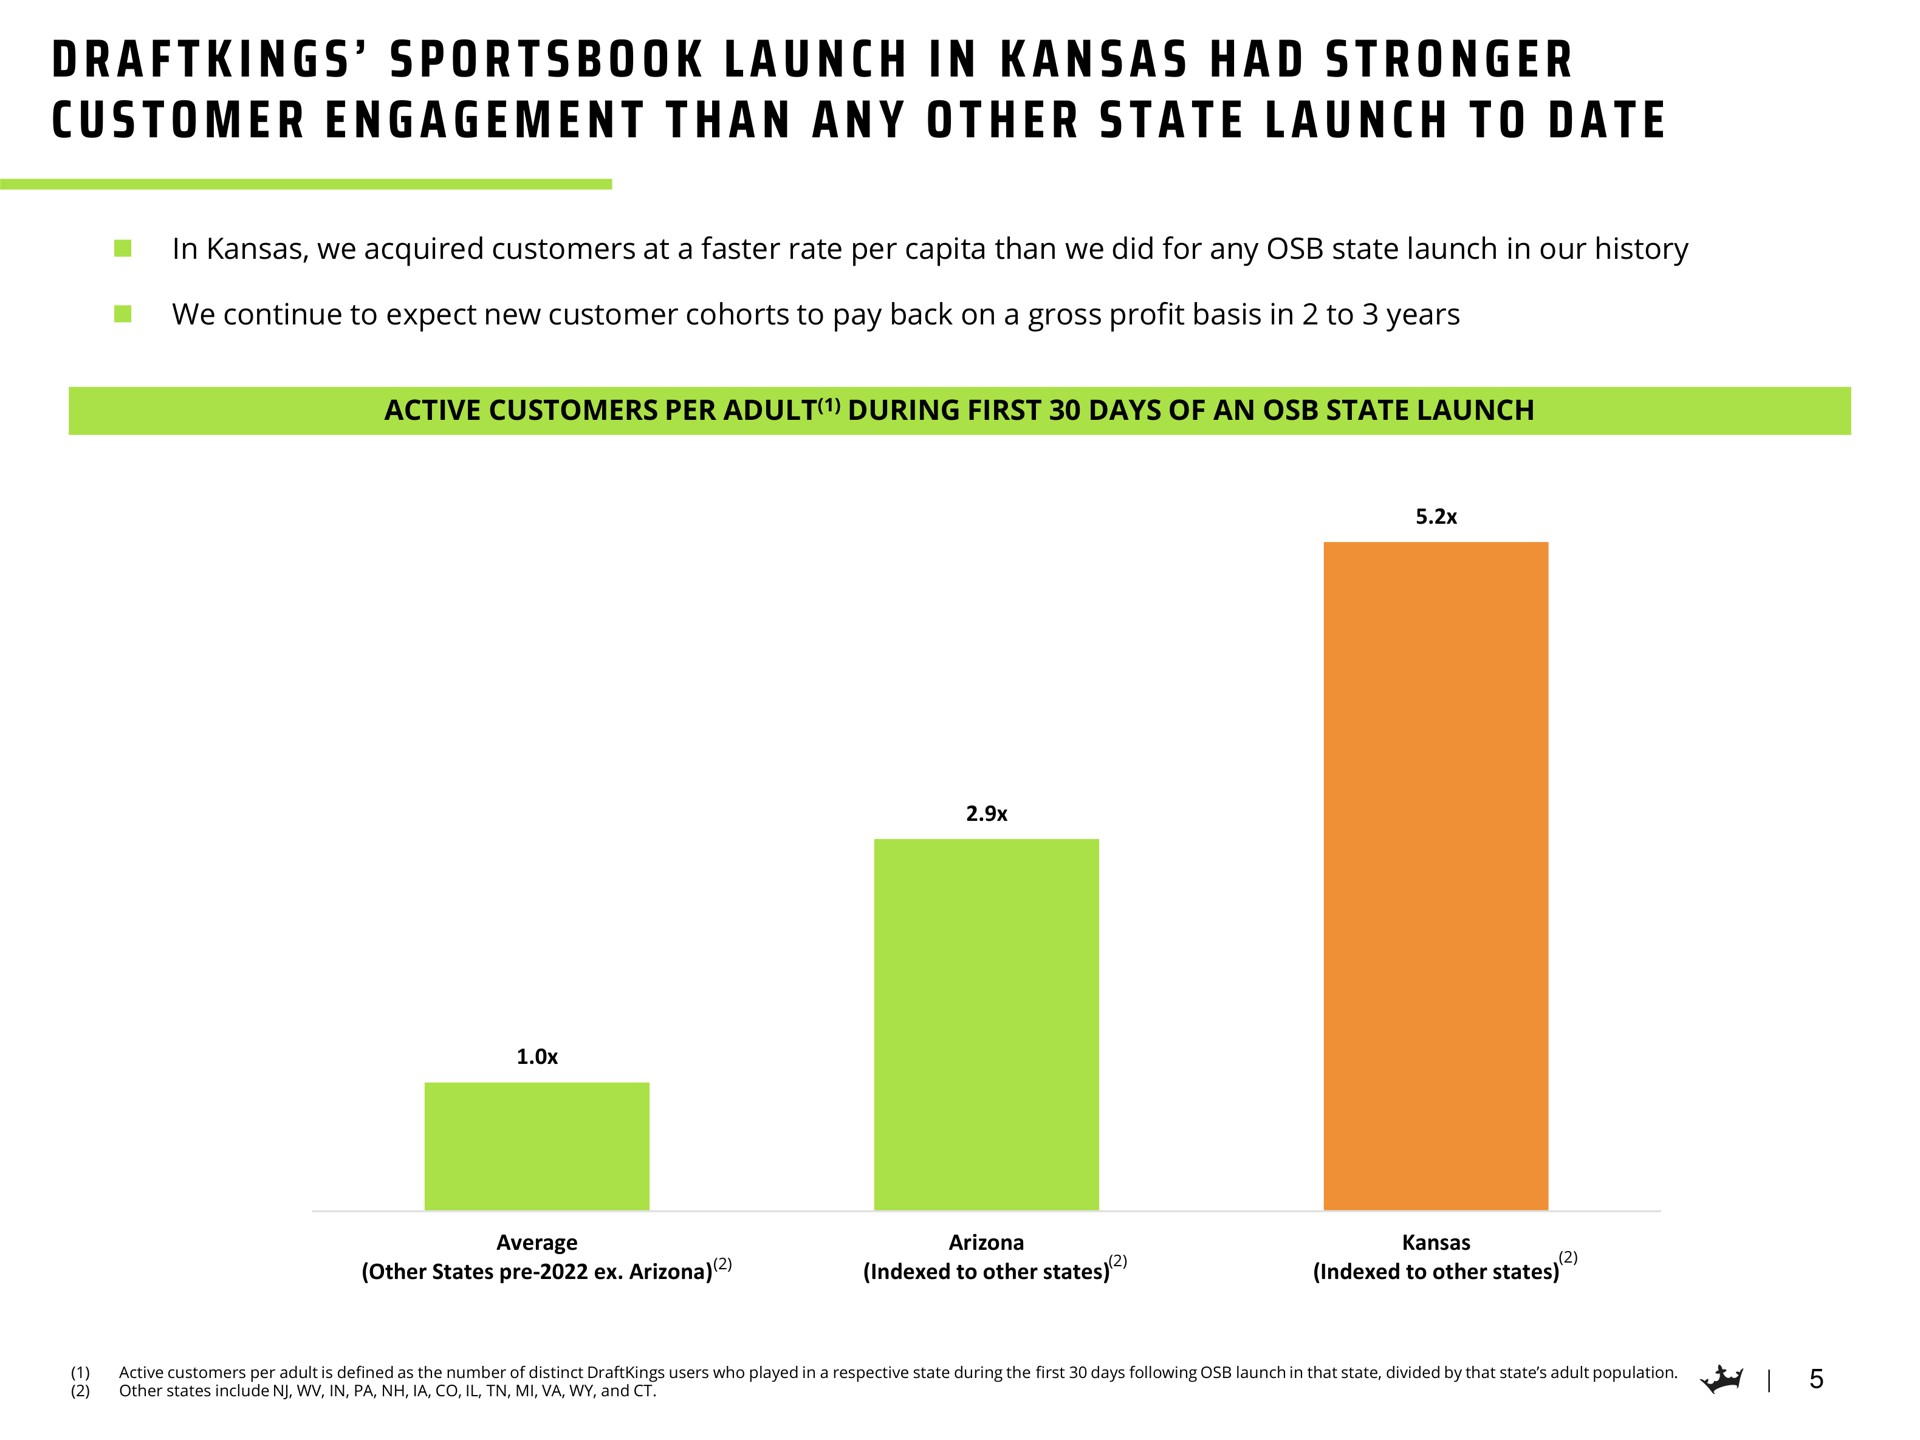 a i a i a a a a a a a a a launch in had customer engagement than any other state launch to date | DraftKings